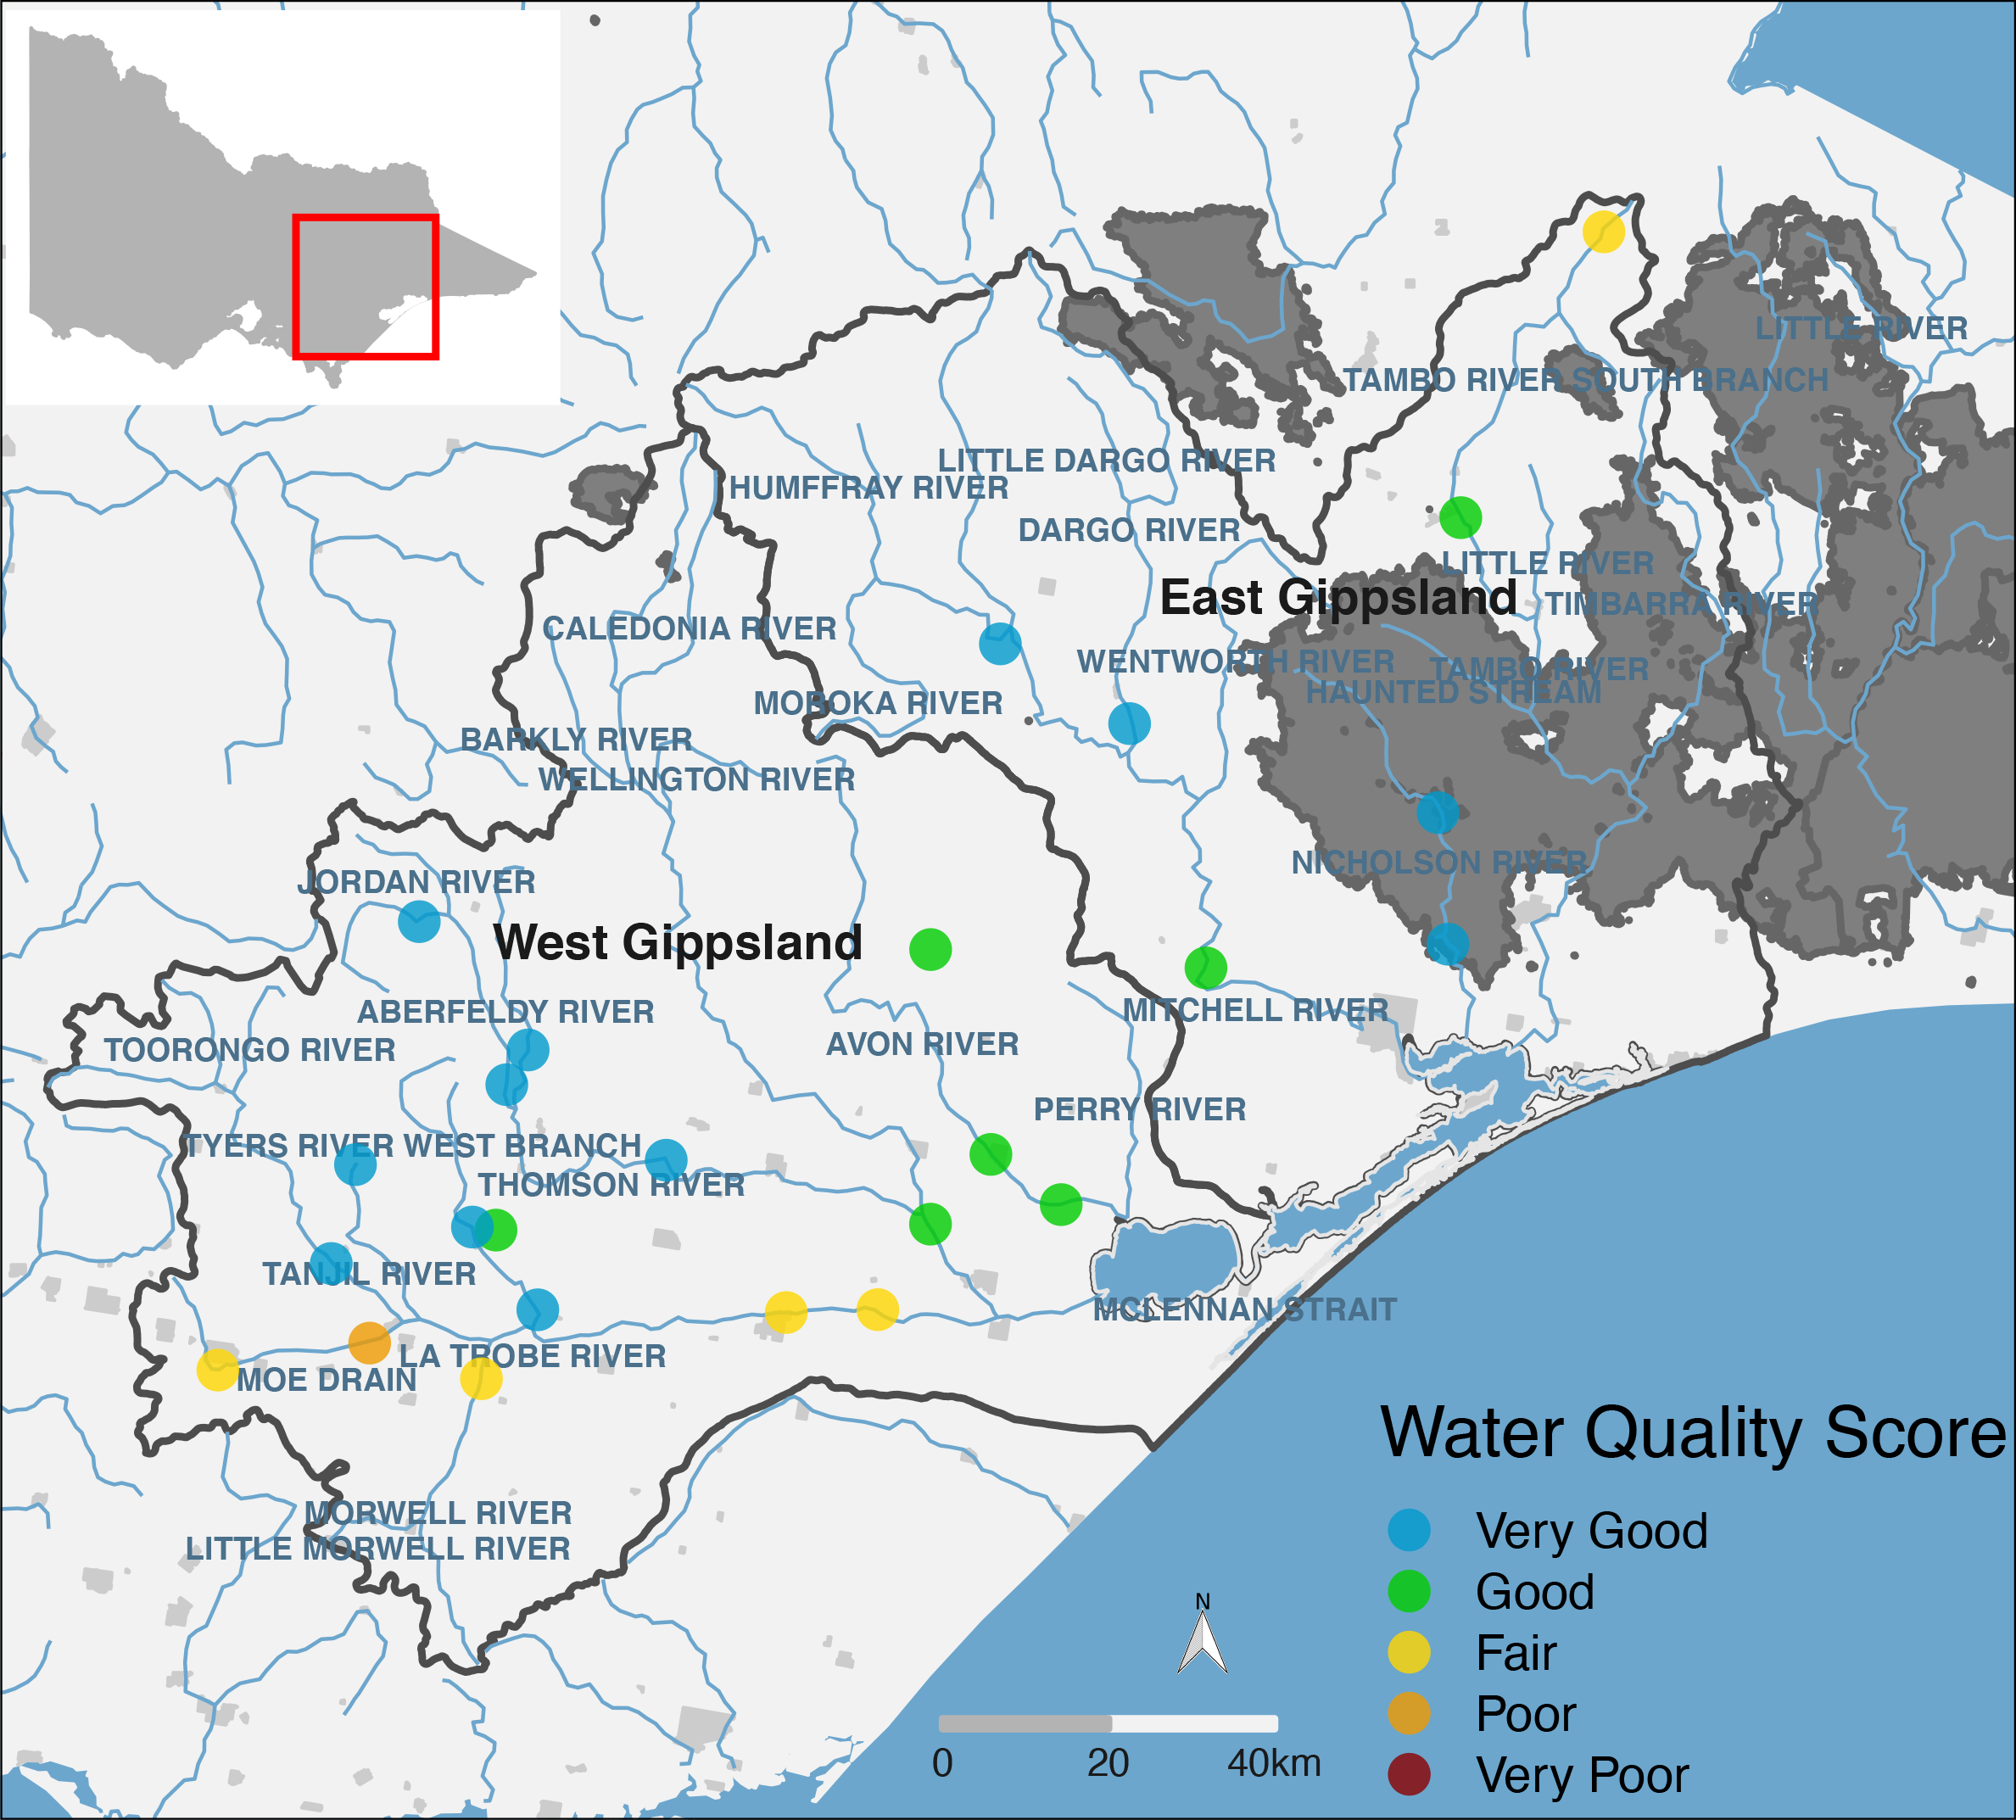 Location and WQI scores of DELWP’s monitoring sites in the Gippsland Lakes catchment. Dark grey shaded areas show the extent of the 2019–2020 bushfires in Gippsland. 